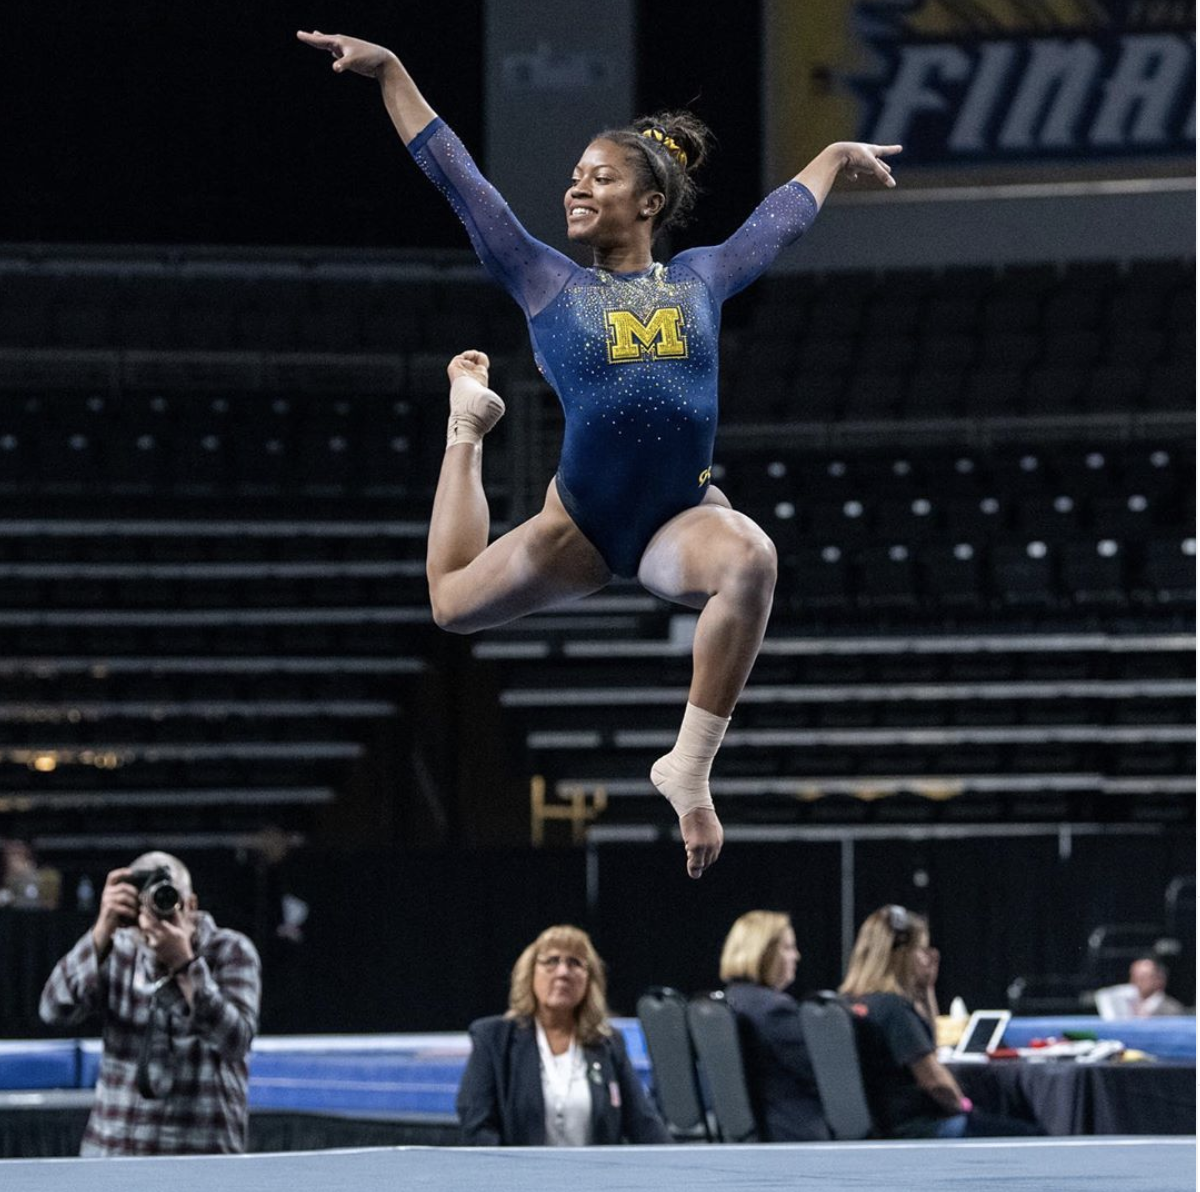 a gymnast jumping on the floor